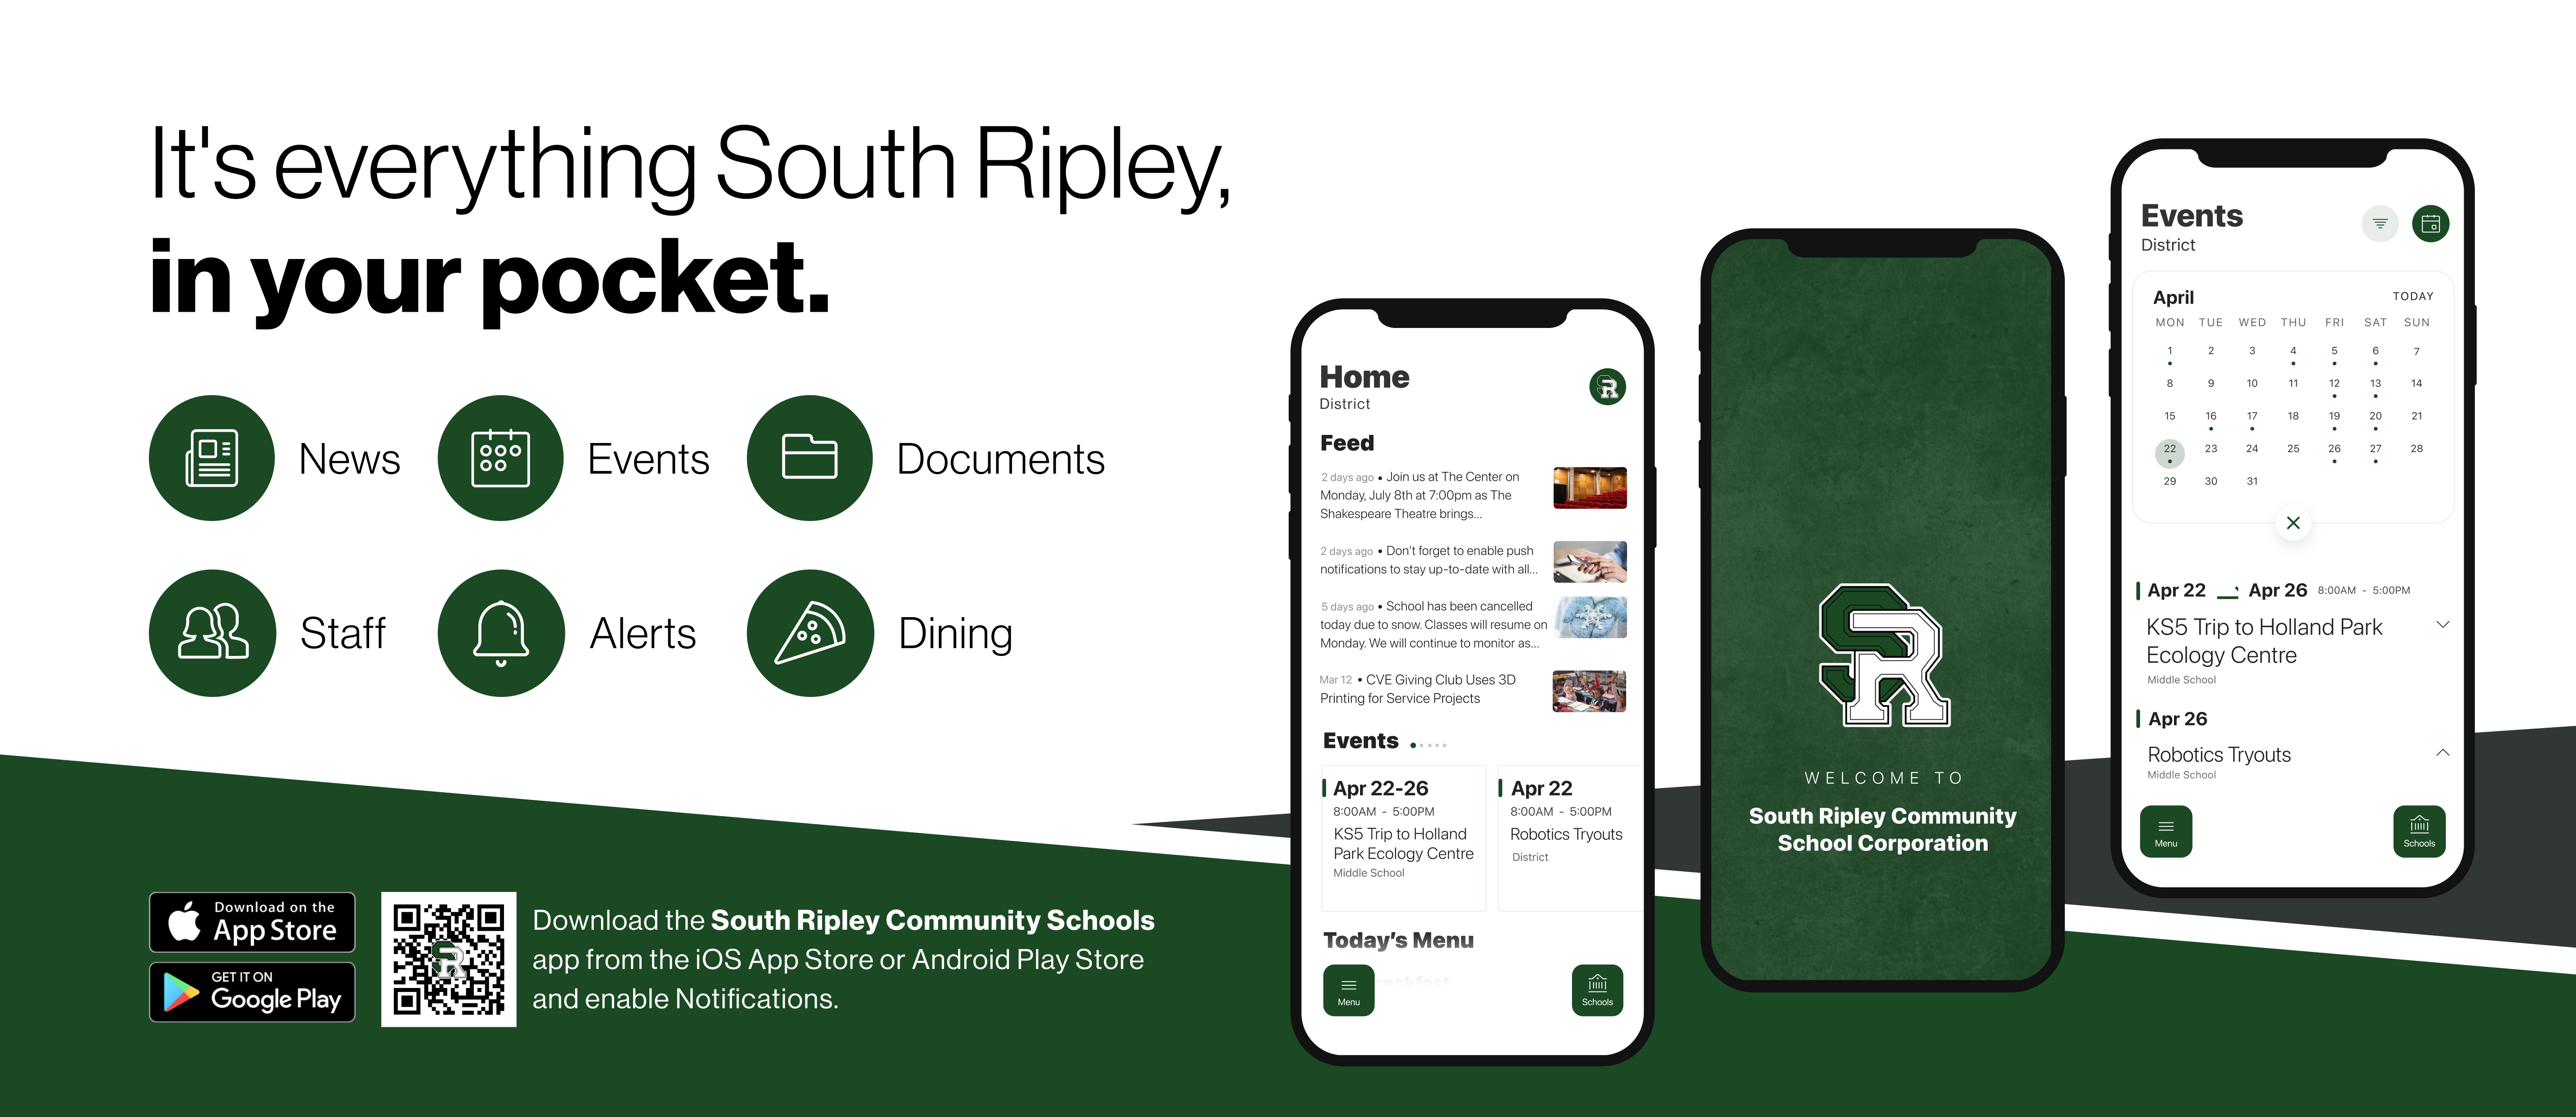 It's everything South Ripley in your pocket.